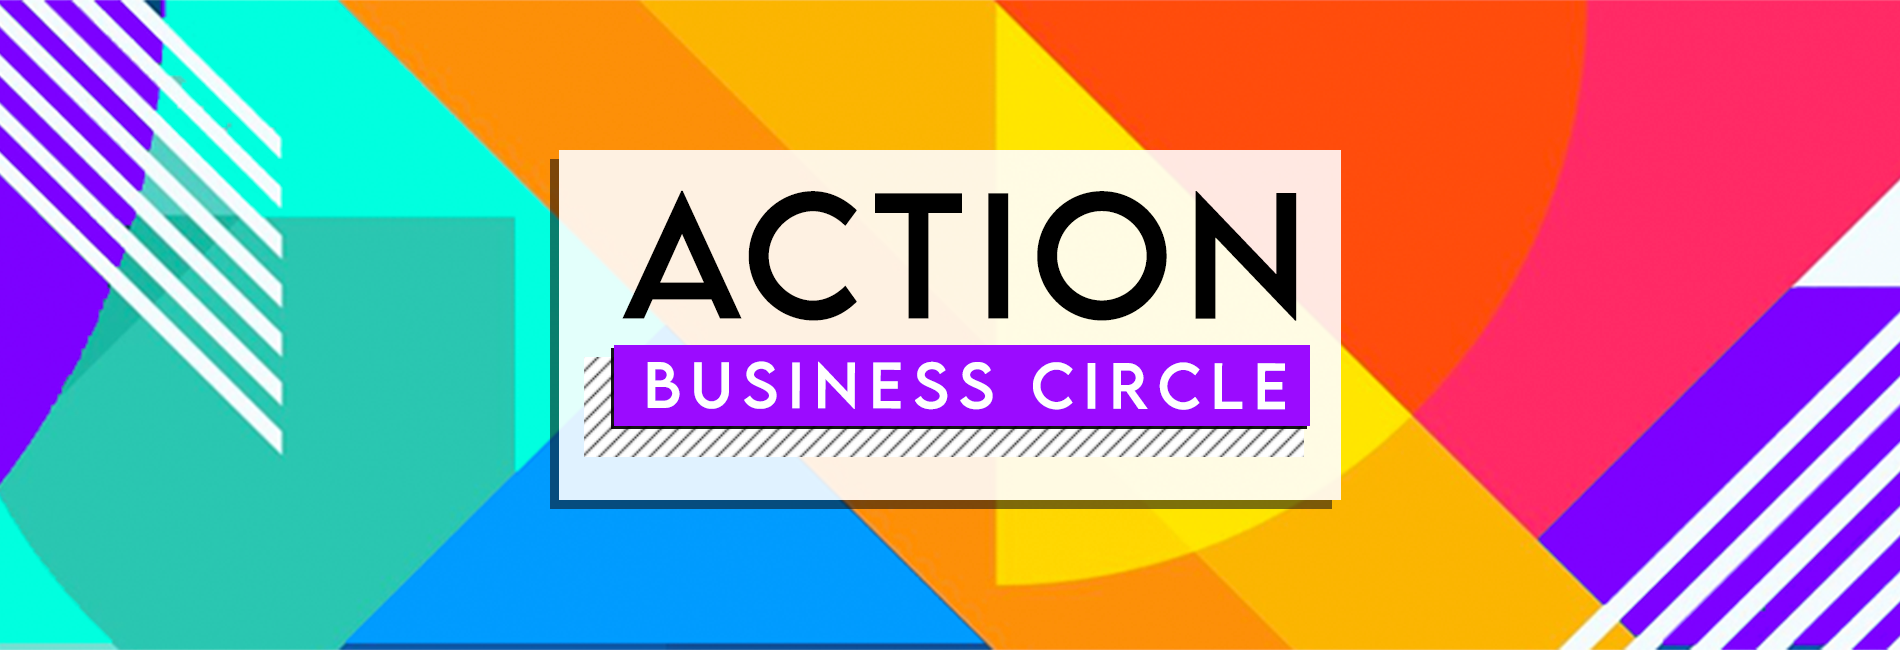 Action Business Circle - Online Business Hub 